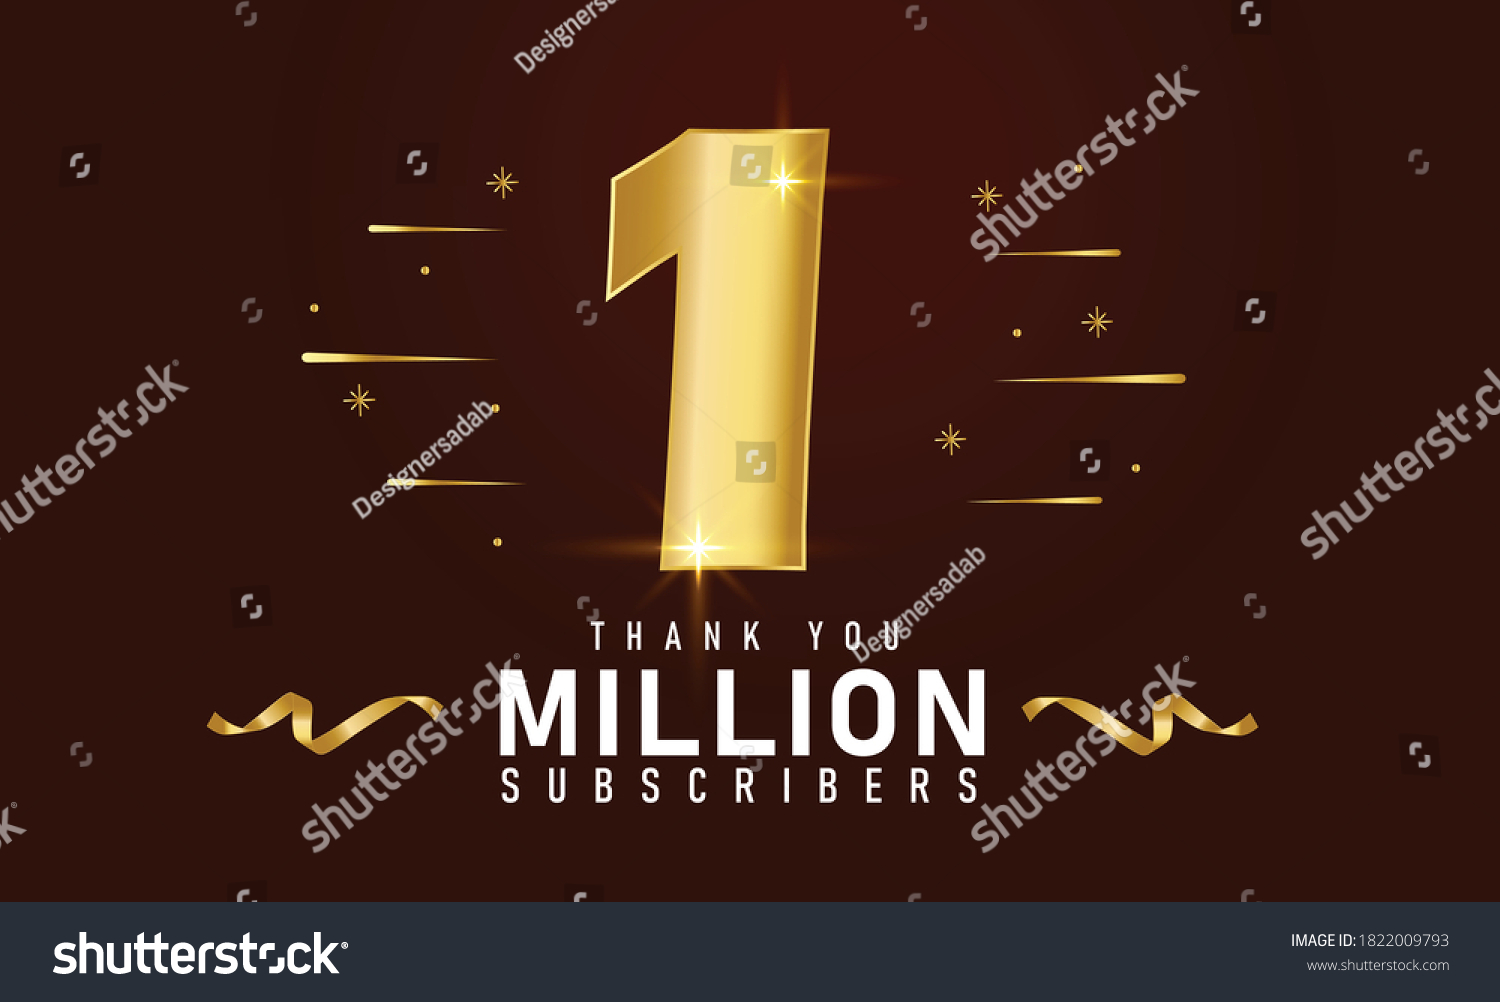 1M subscribers celebration background design. 1 Million subscribers #1822009793